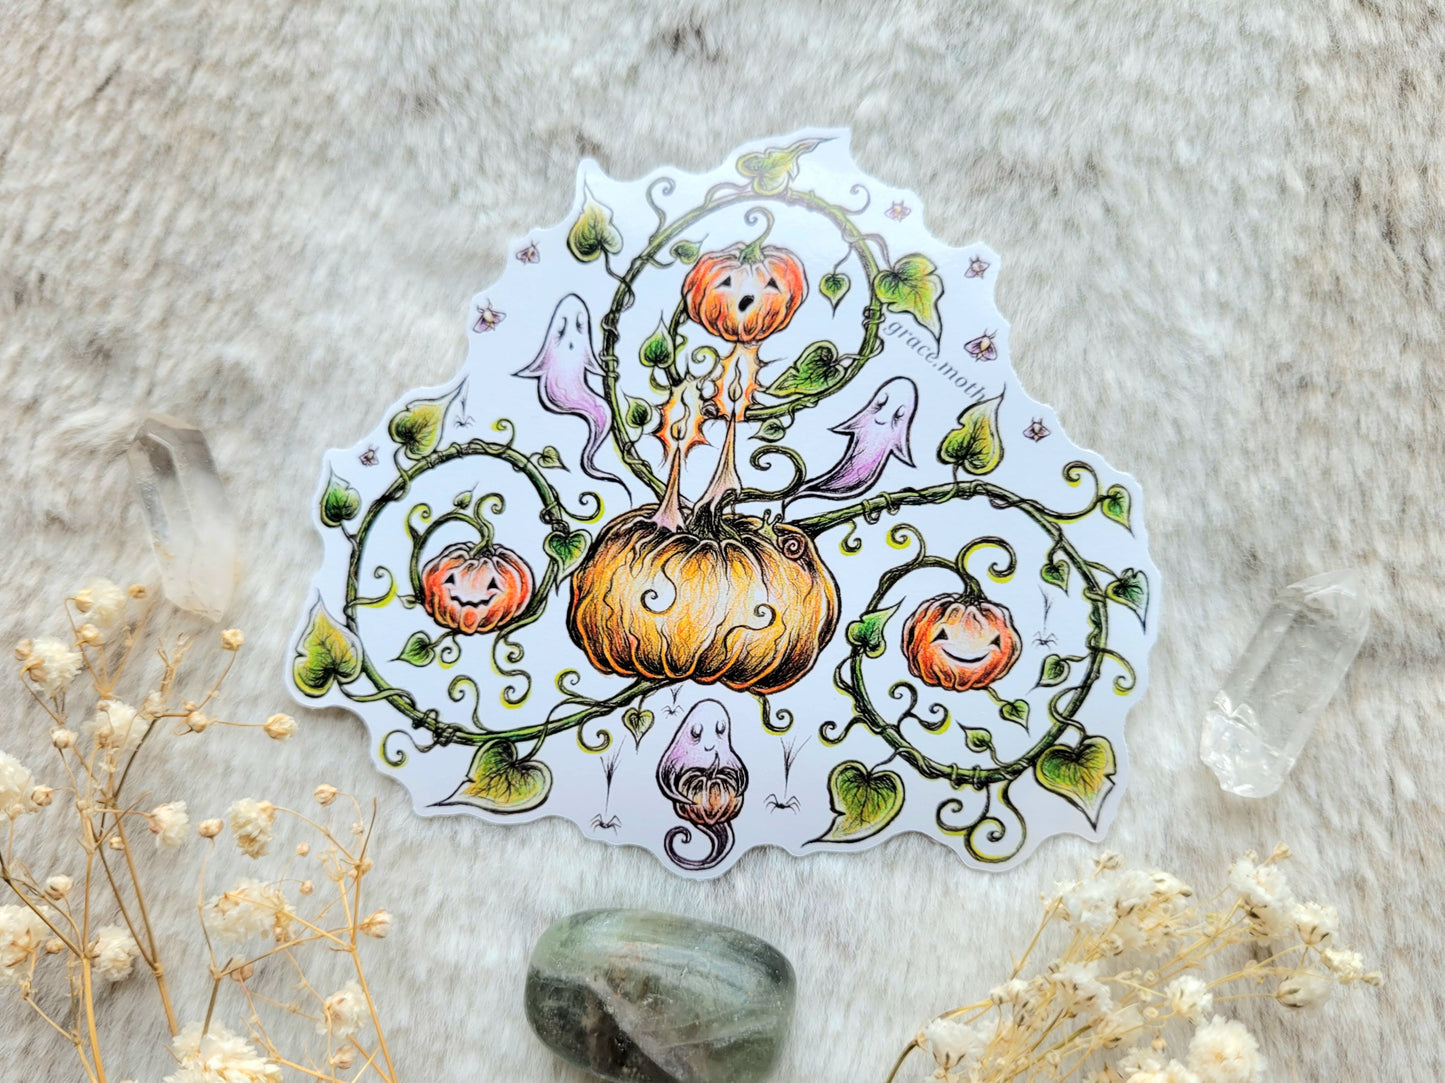 Pumpkin Spiral - Vinyl Sticker 10cm - Illustrated by Grace moth. Witchy, cottagecore, fantasy, folklore, fairy